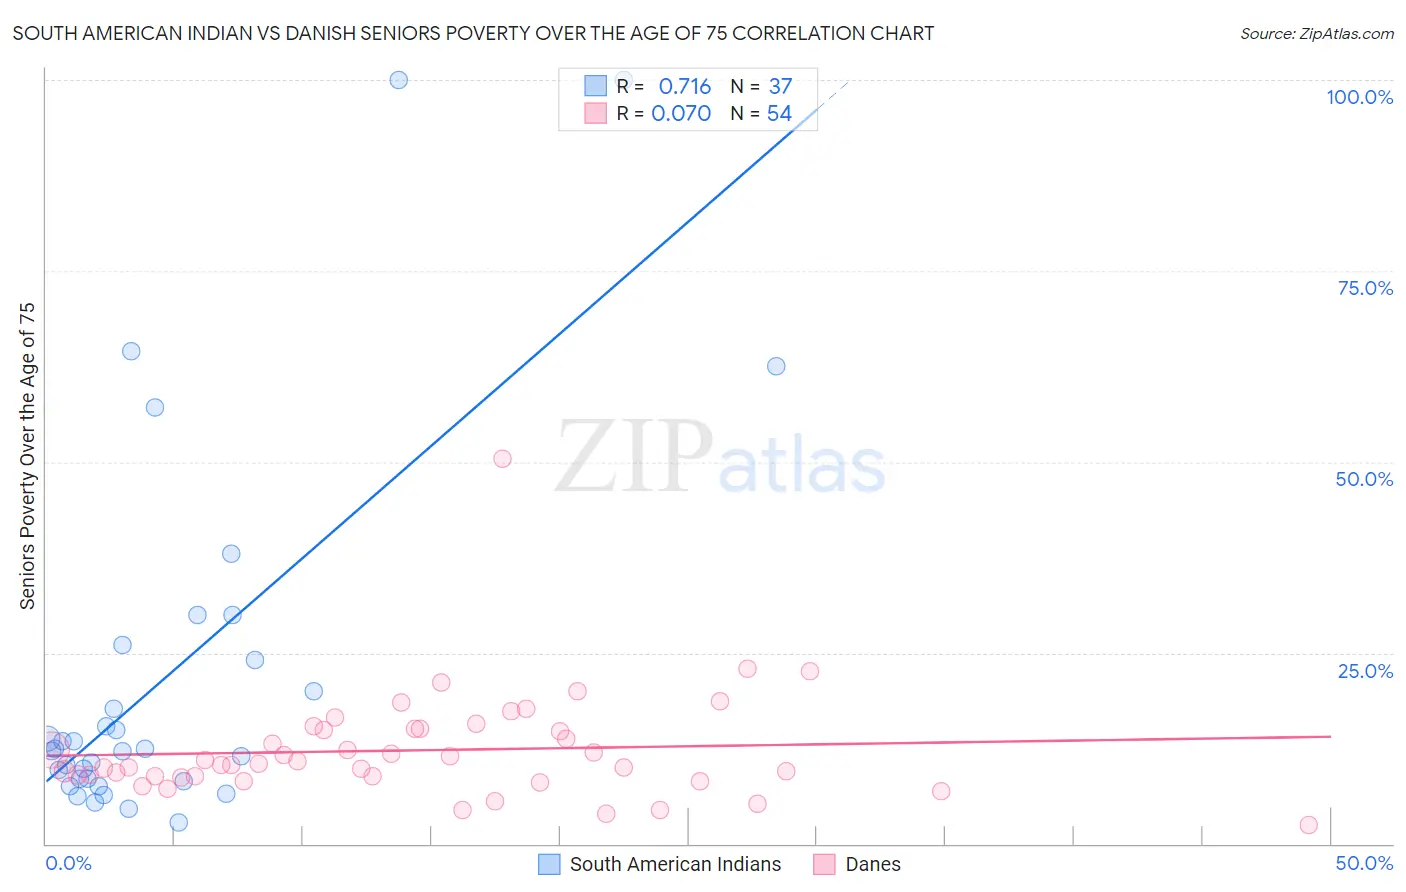 South American Indian vs Danish Seniors Poverty Over the Age of 75